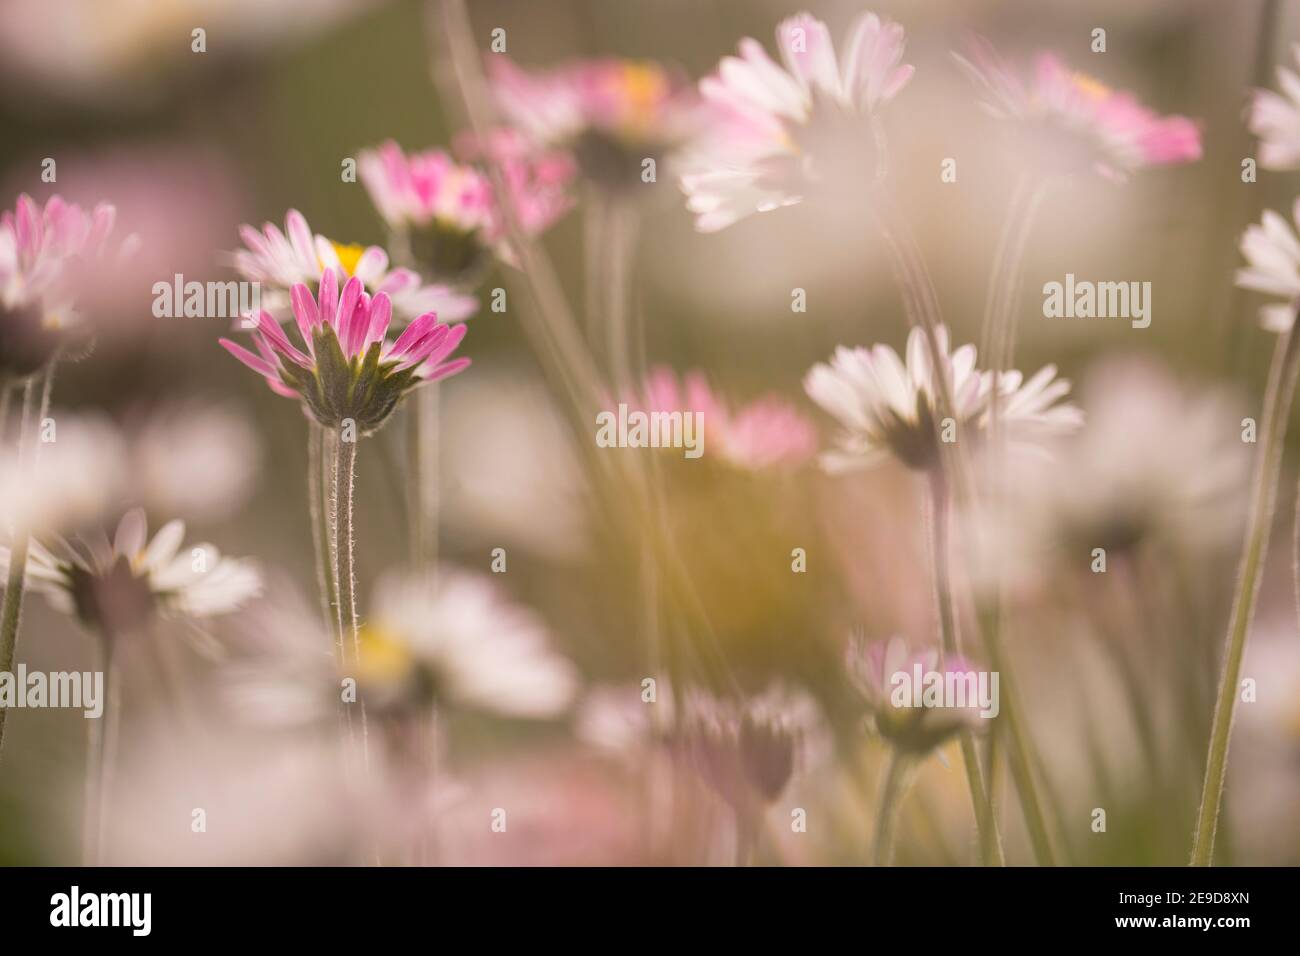 A field of wild white and yellow Southern Daisy (Bellis sylvestris) flowers in spring Stock Photo